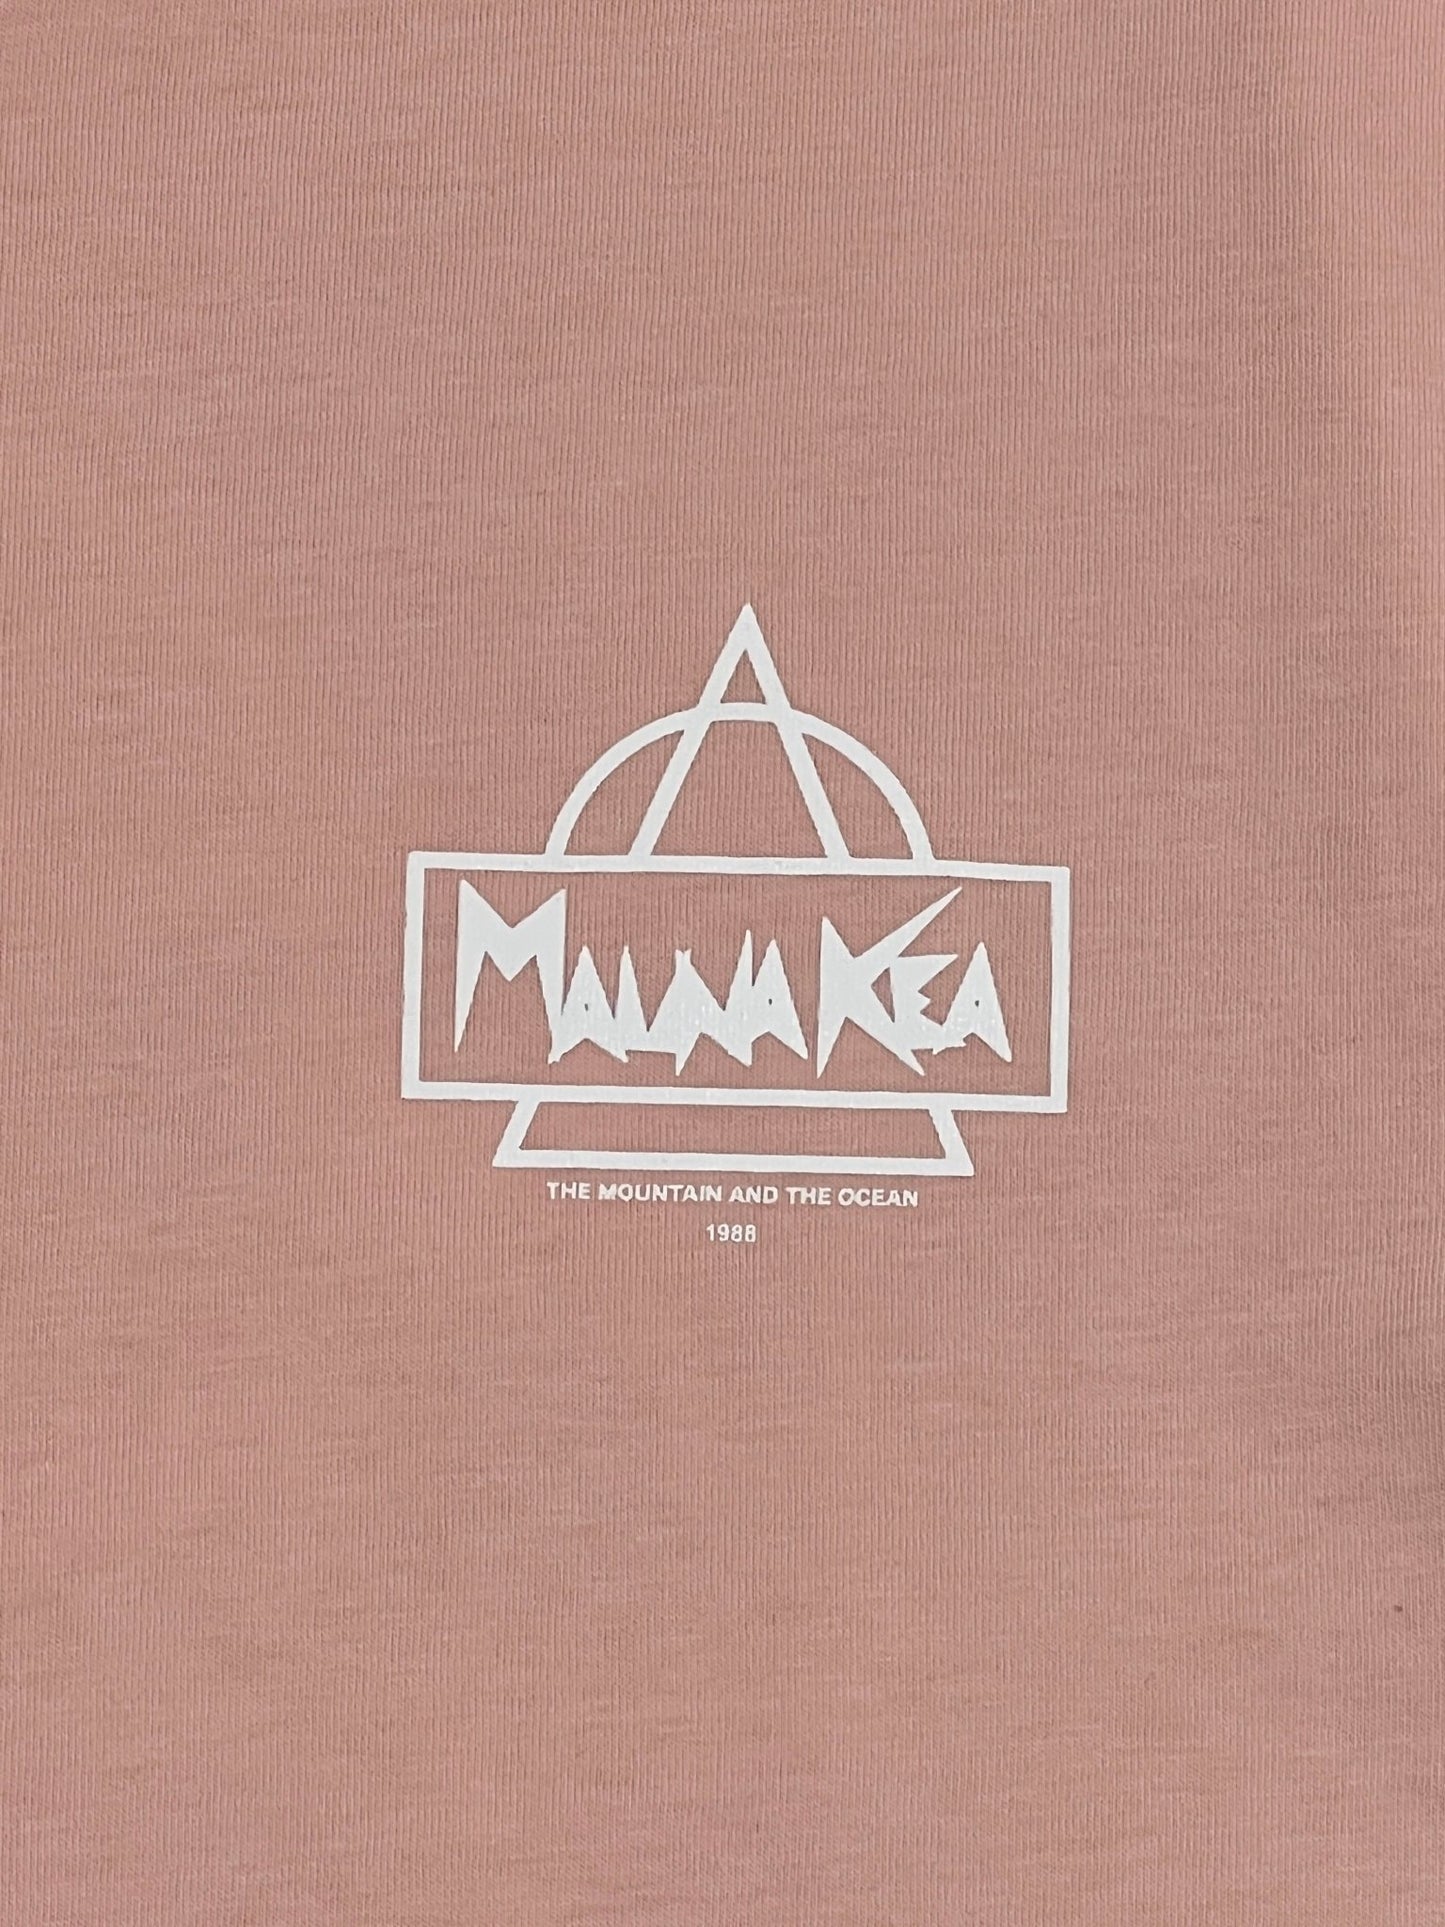 A pink, 100% cotton MAUNA-KEA MKE100-04 HERITAGE TEE W SCREEN PRINT PINK from MAUNA-KEA featuring a white outline of a triangular mountain, the text "Mauna Kea," and smaller print saying "The Mountain and The Ocean 1988.